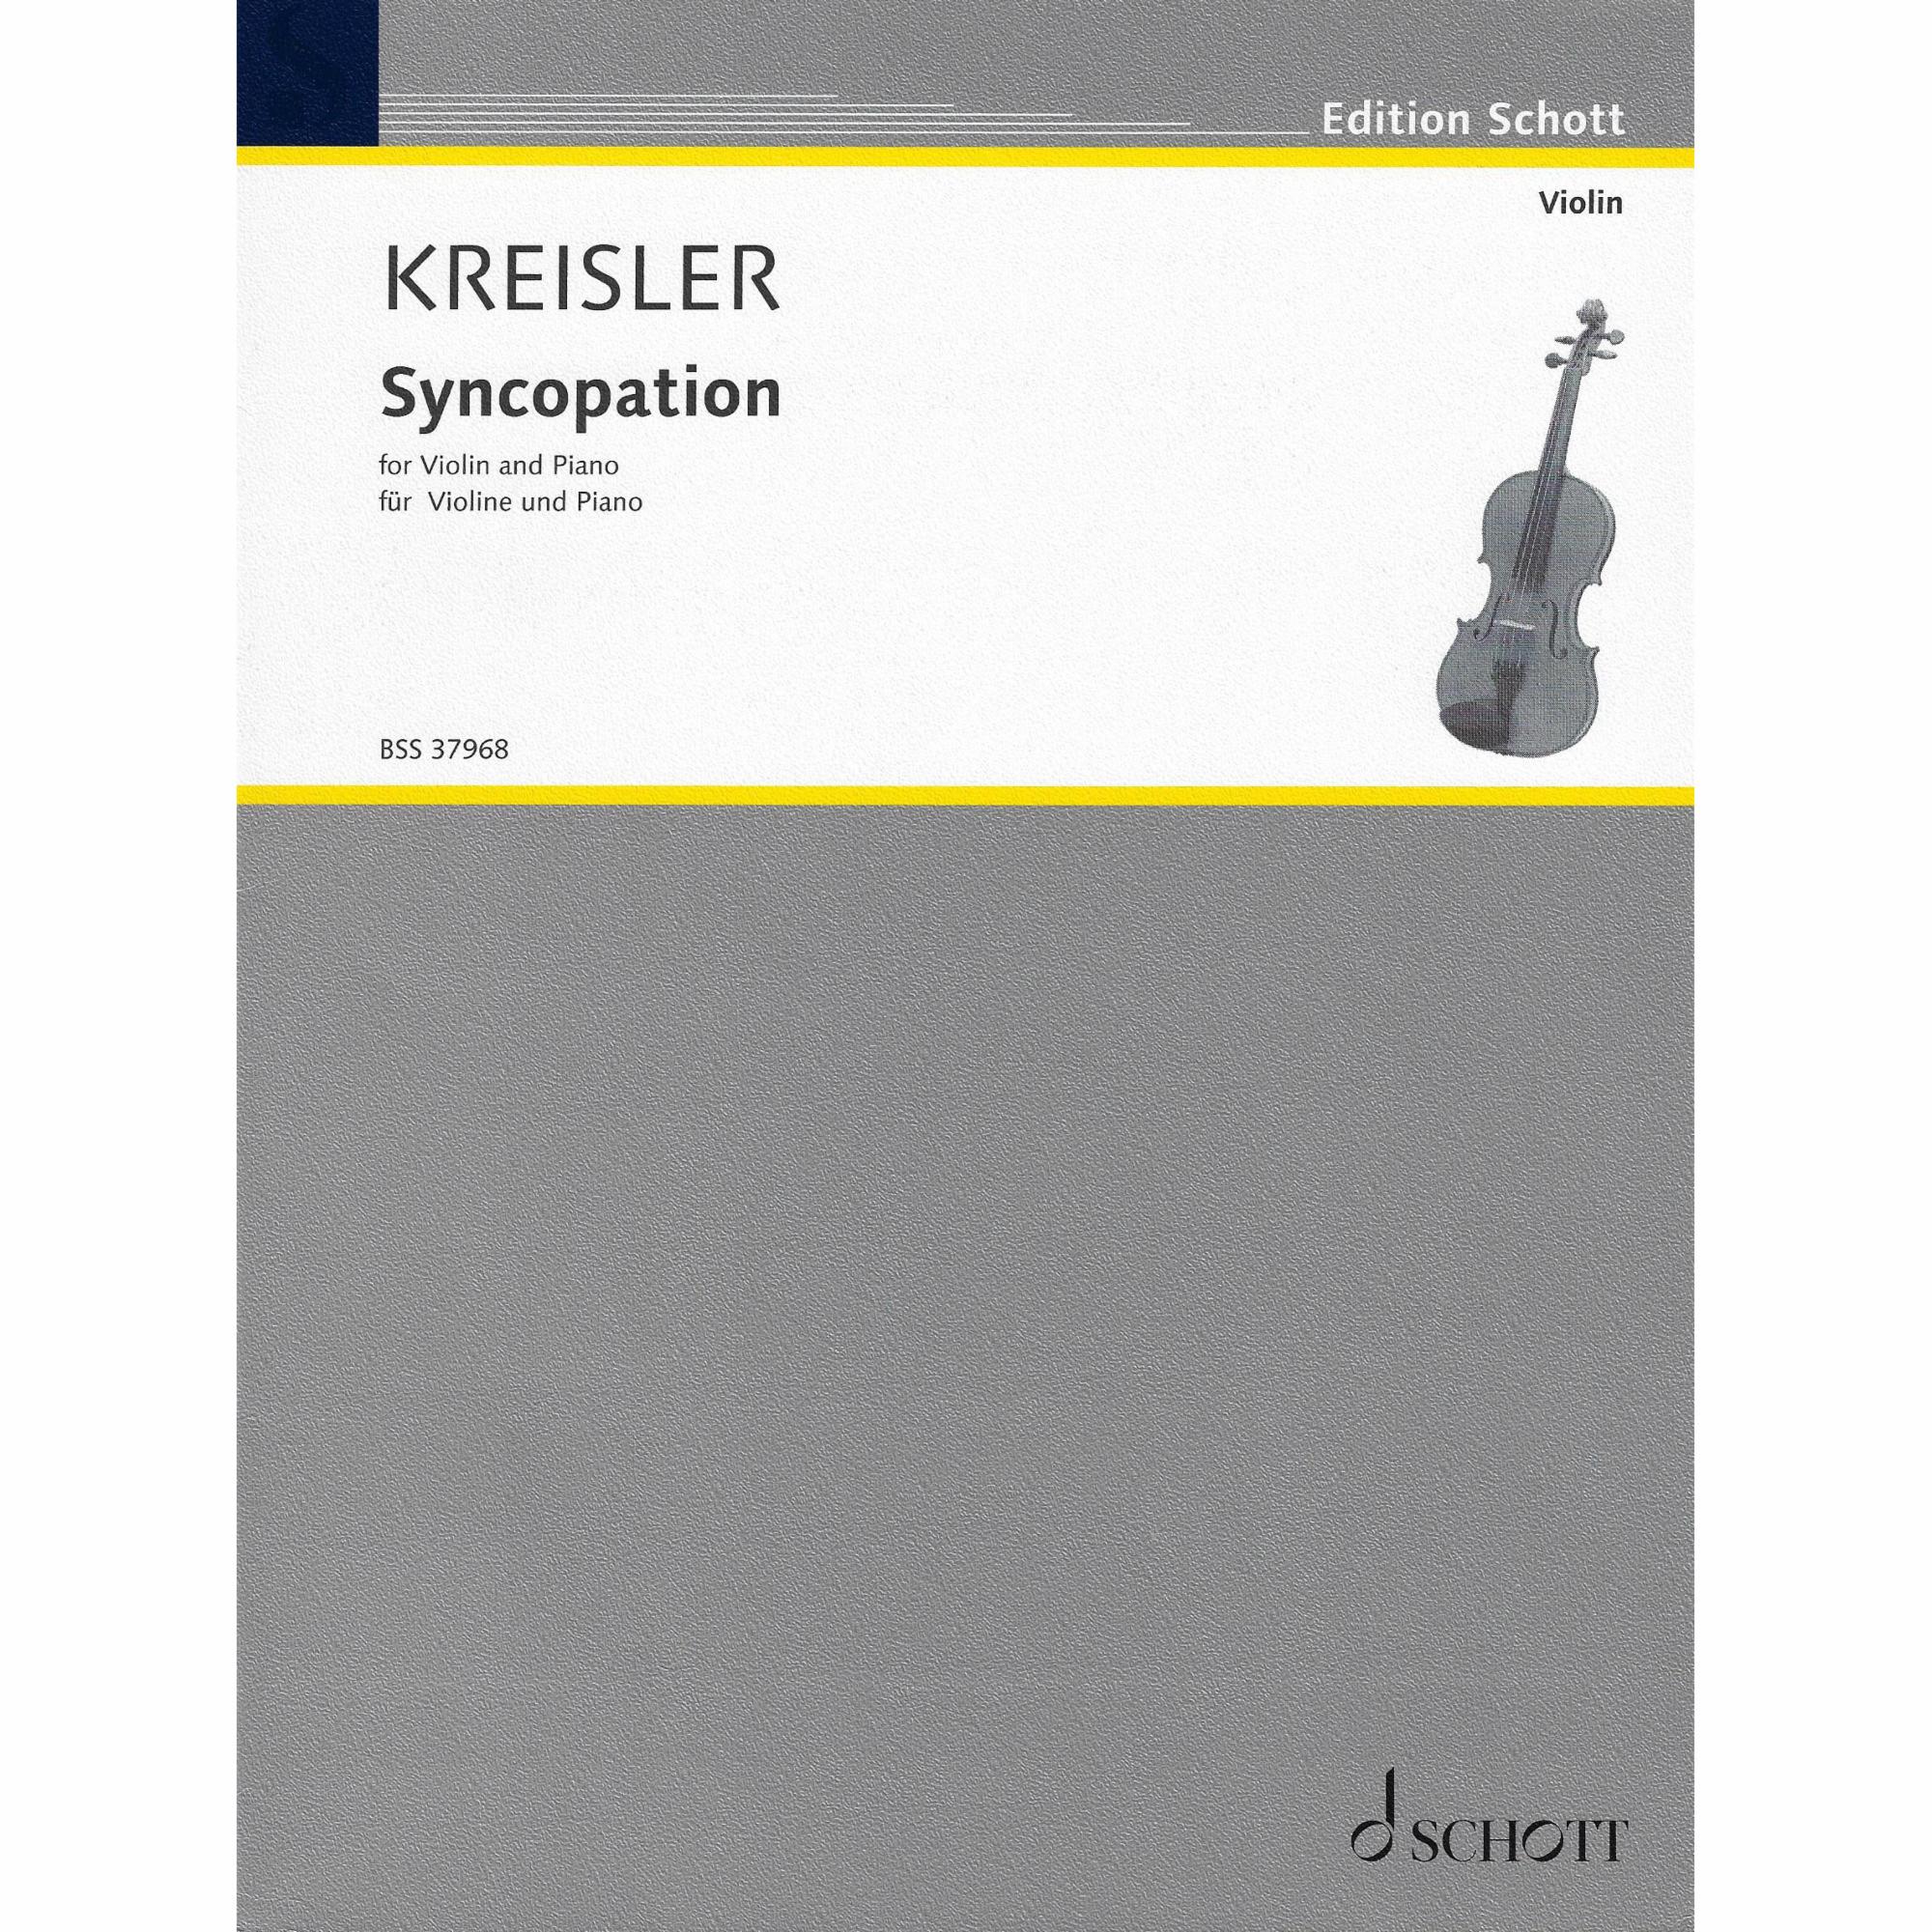 Kreisler -- Syncopation for Violin and Piano